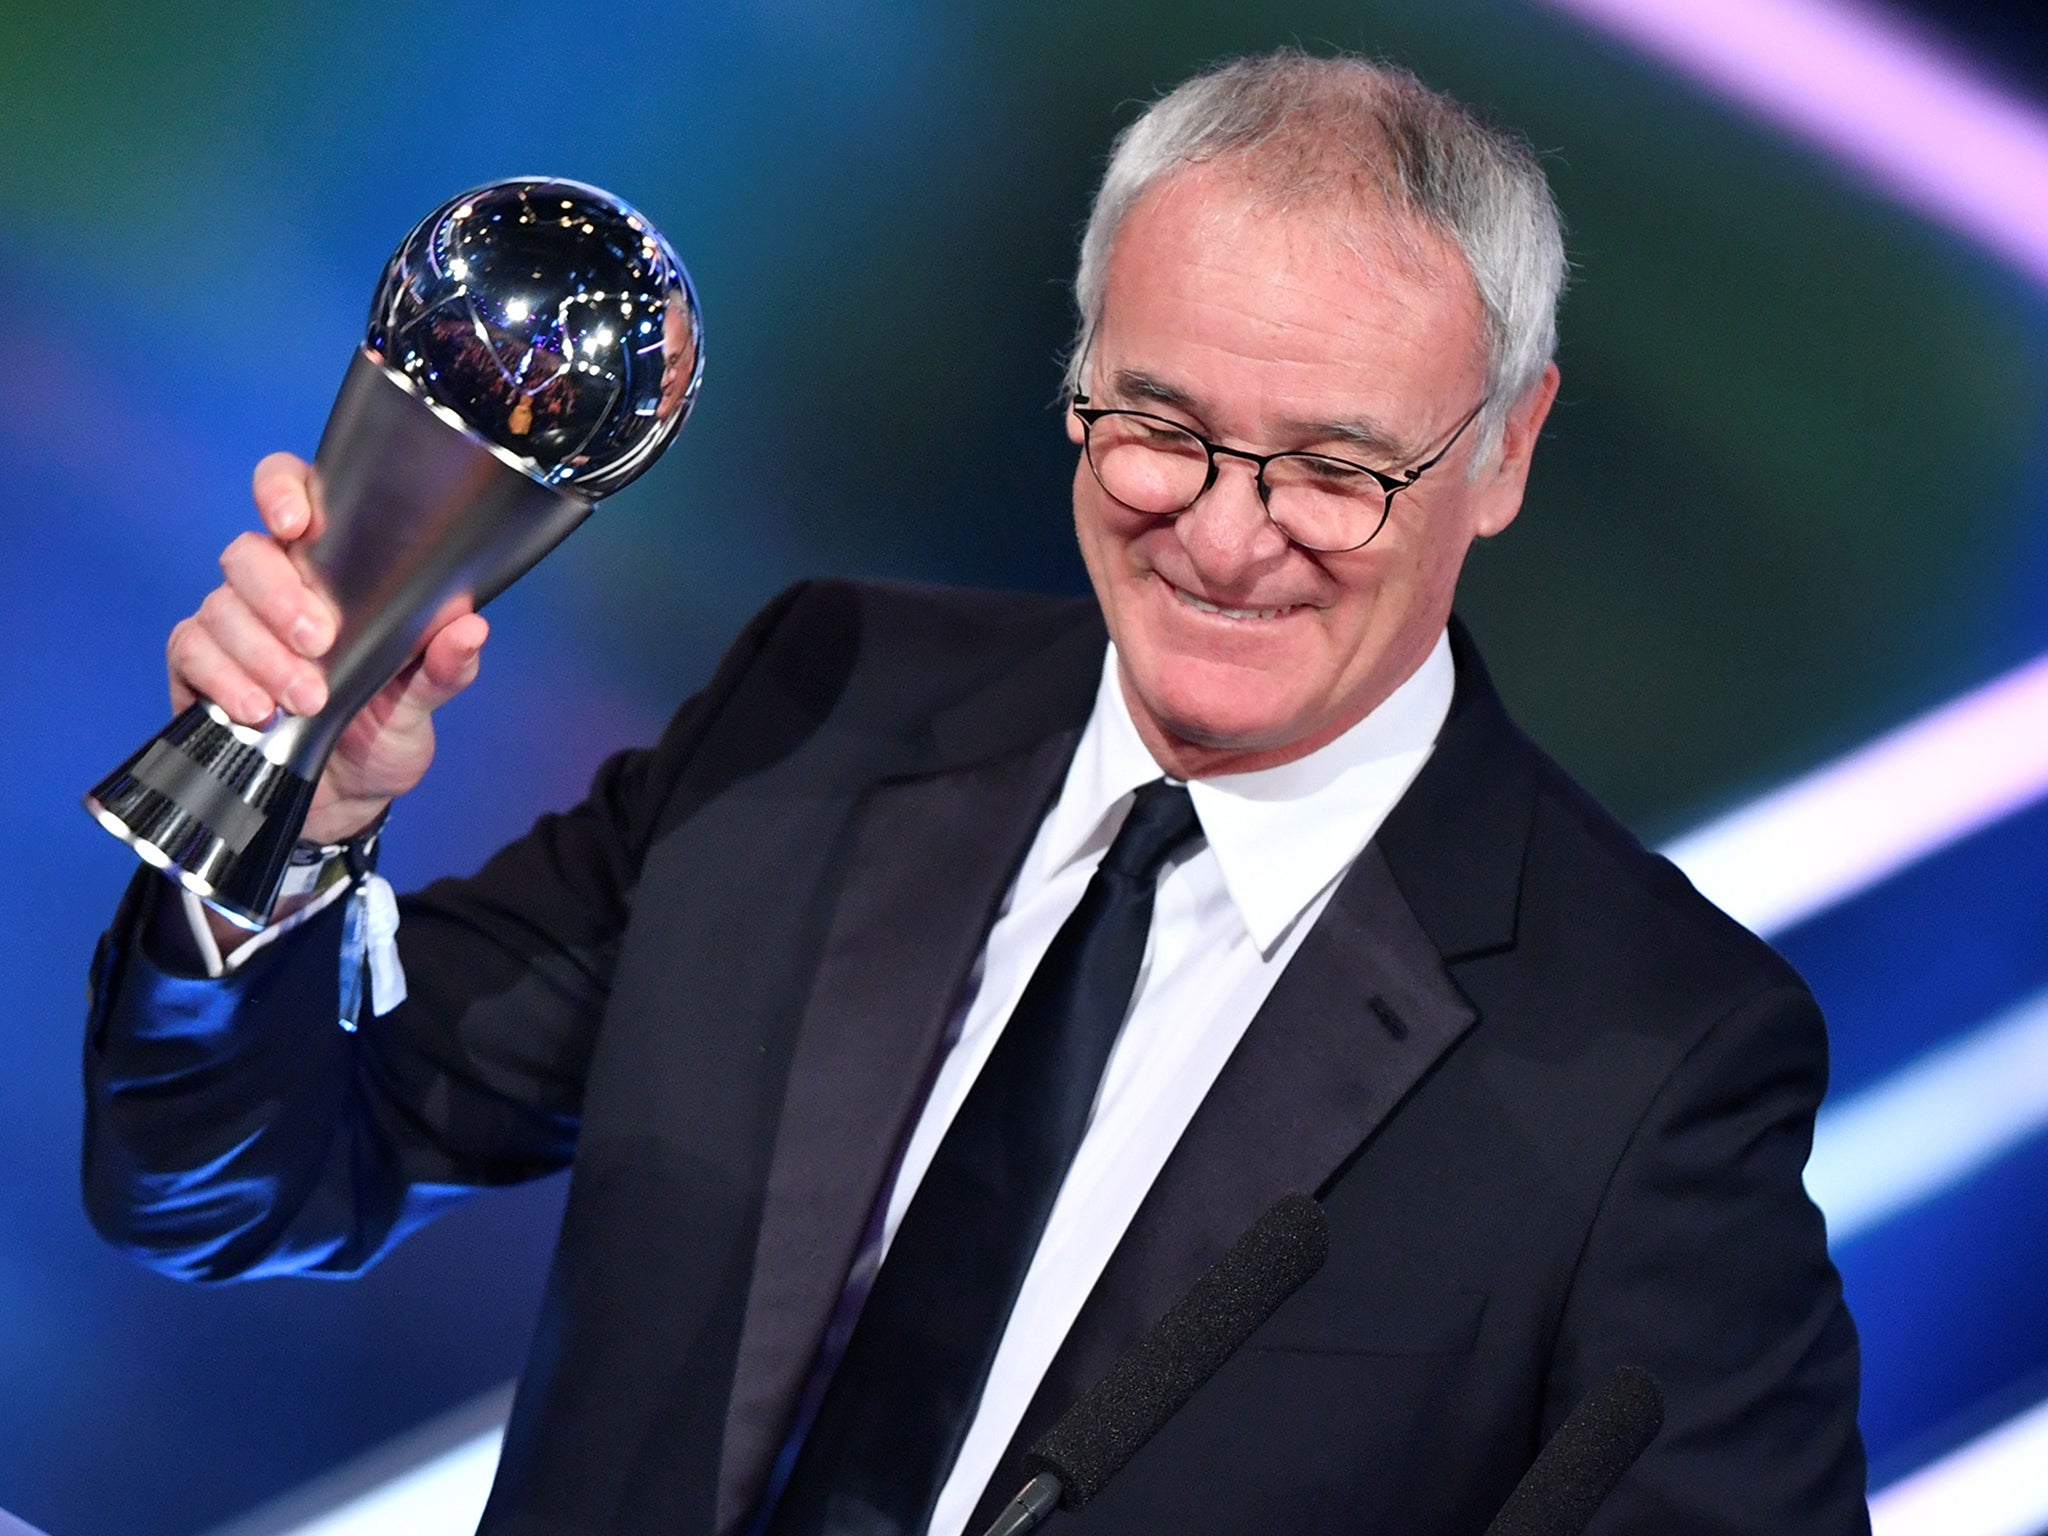 Ranieri has been described as "the protagonist of the extraordinary journey by Leicester"